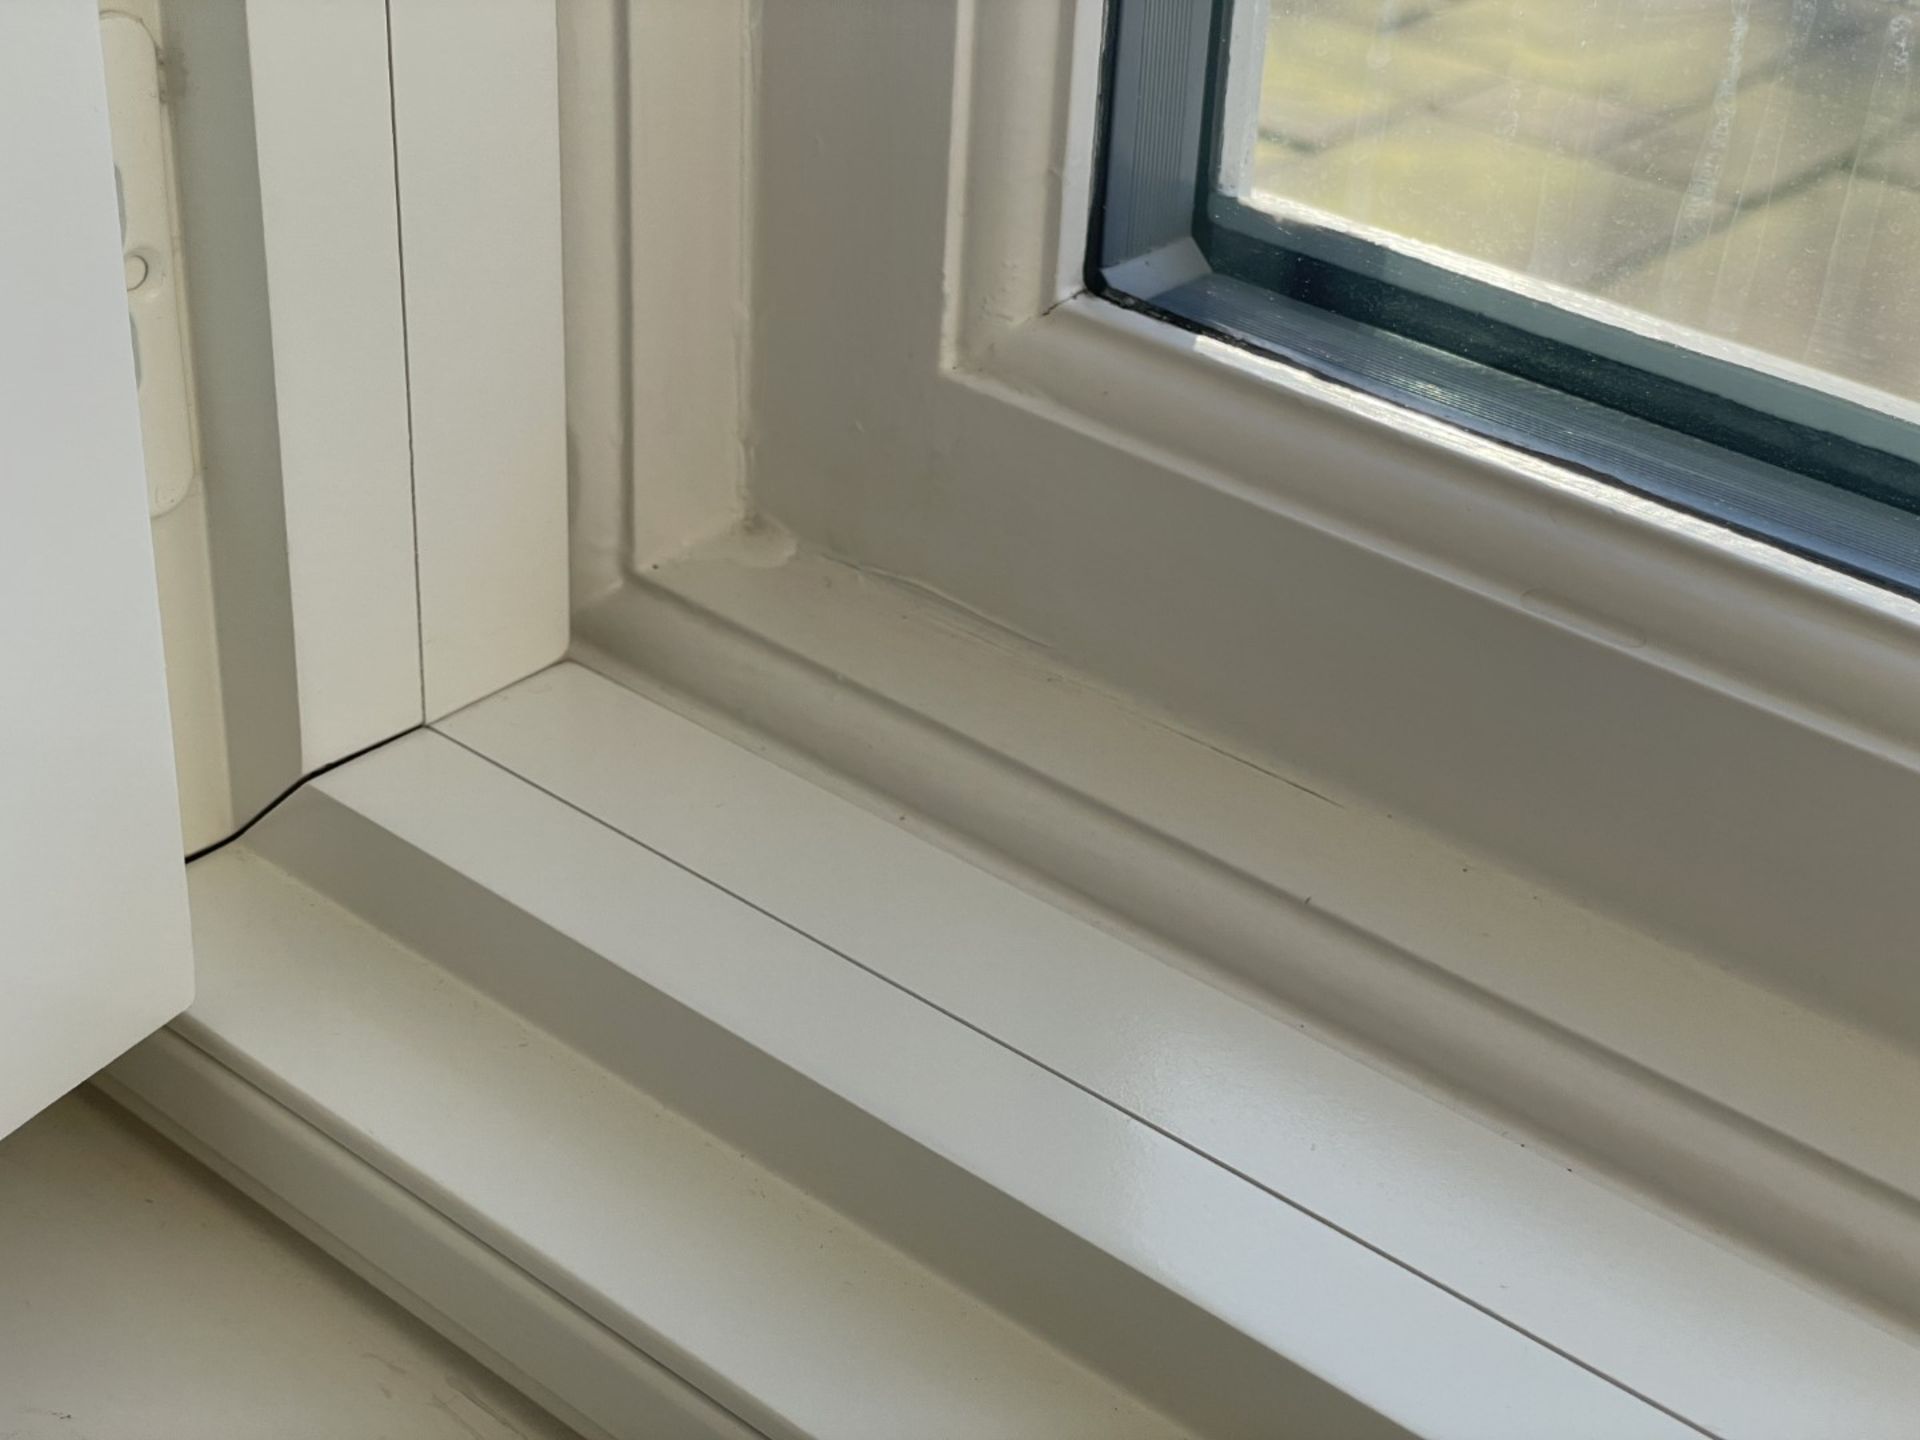 1 x Hardwood Timber Double Glazed Window Frames fitted with Shutter Blinds, In White - Ref: PAN107 - Image 10 of 15